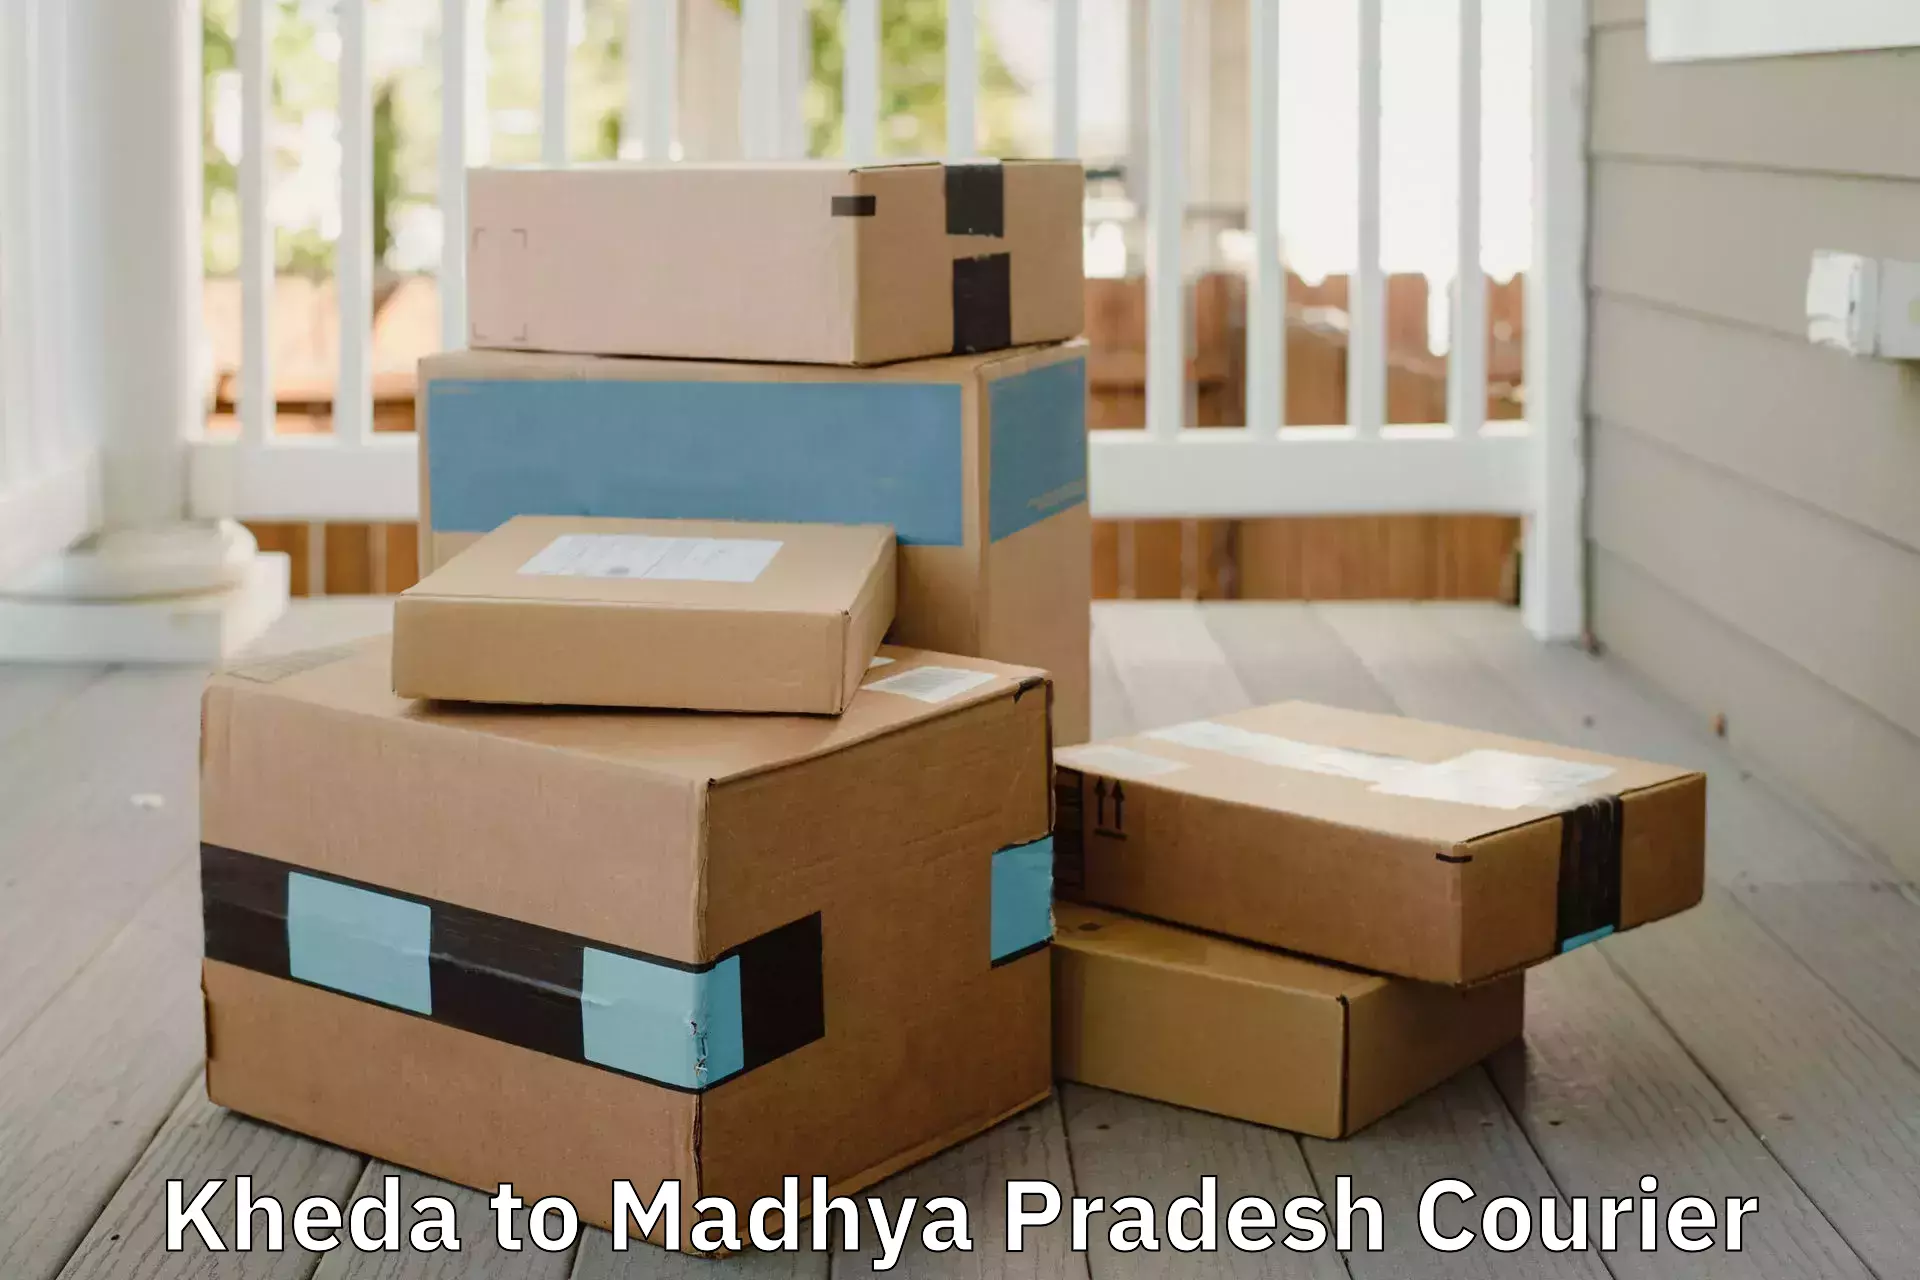 Trusted furniture transport Kheda to Gwalior